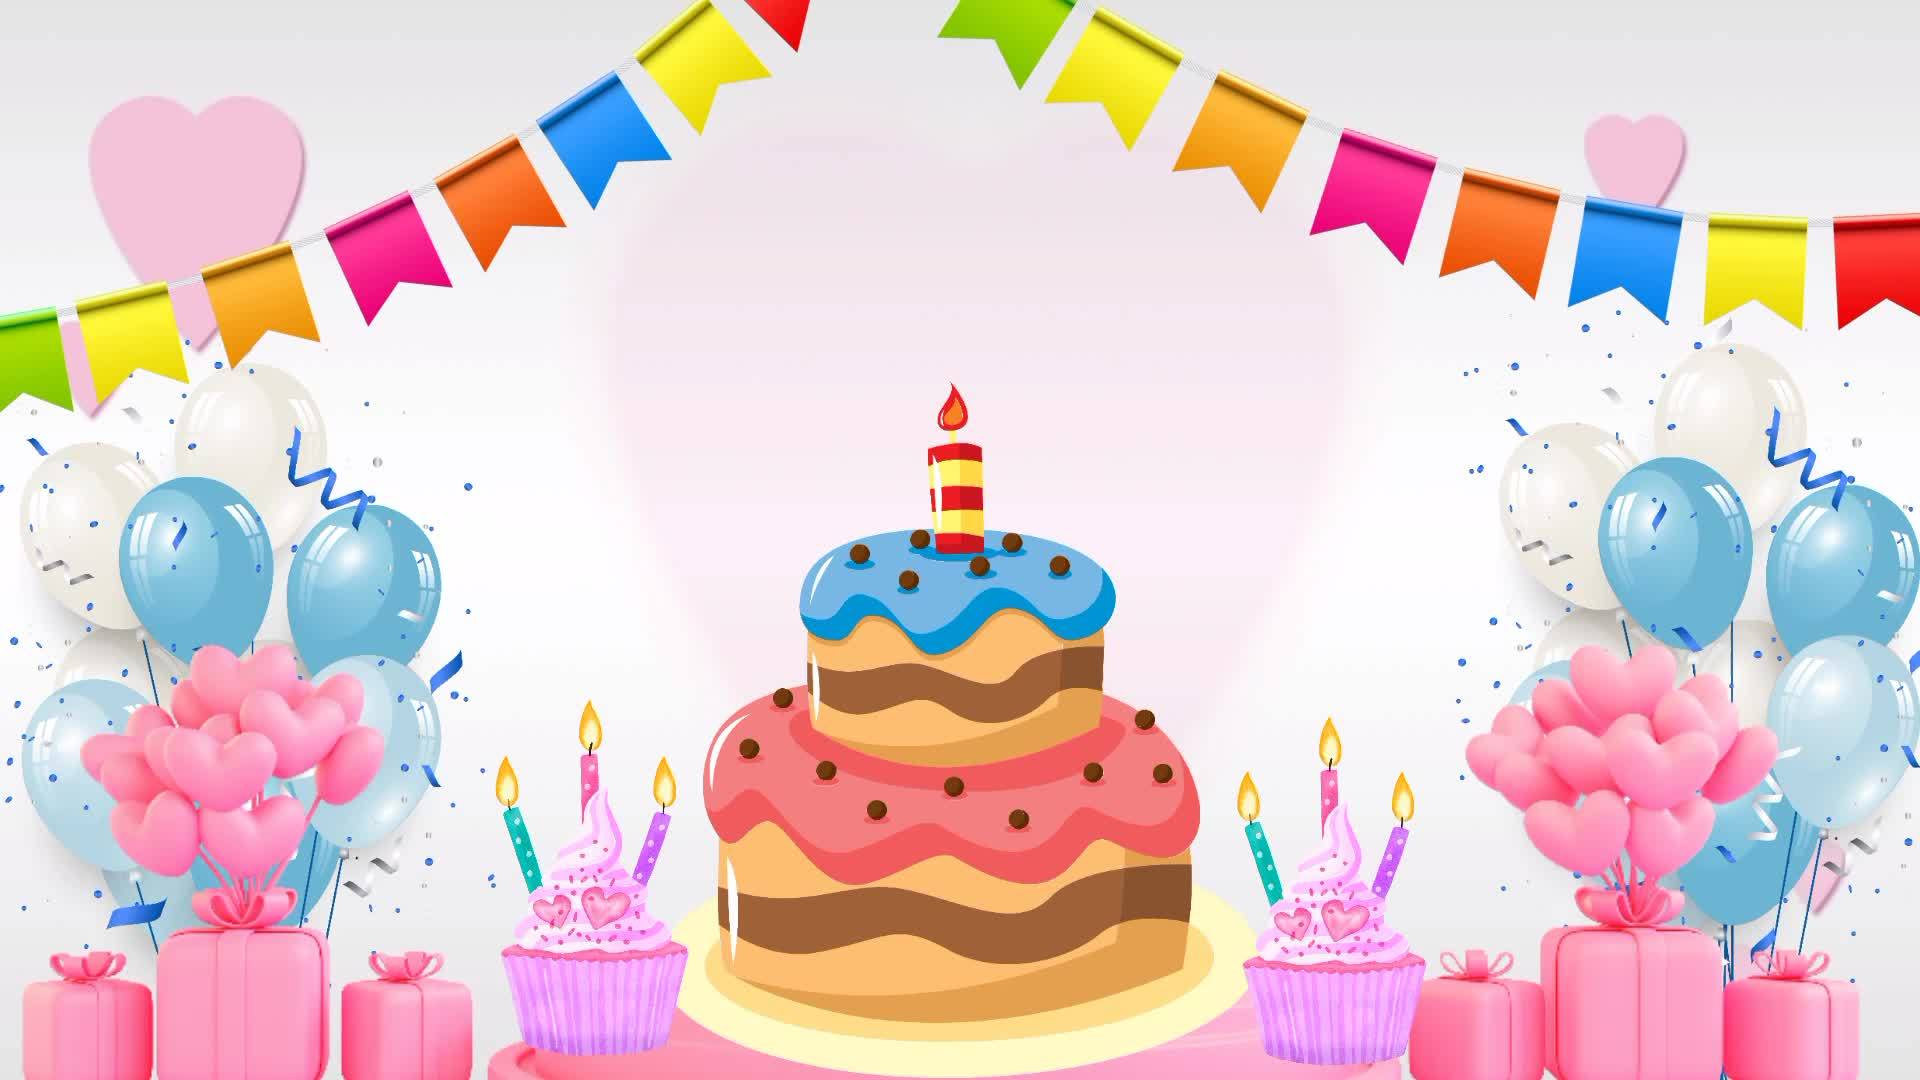 Rotating Happy Birthday Cake GIF Animation With Candles  SuperbWishes